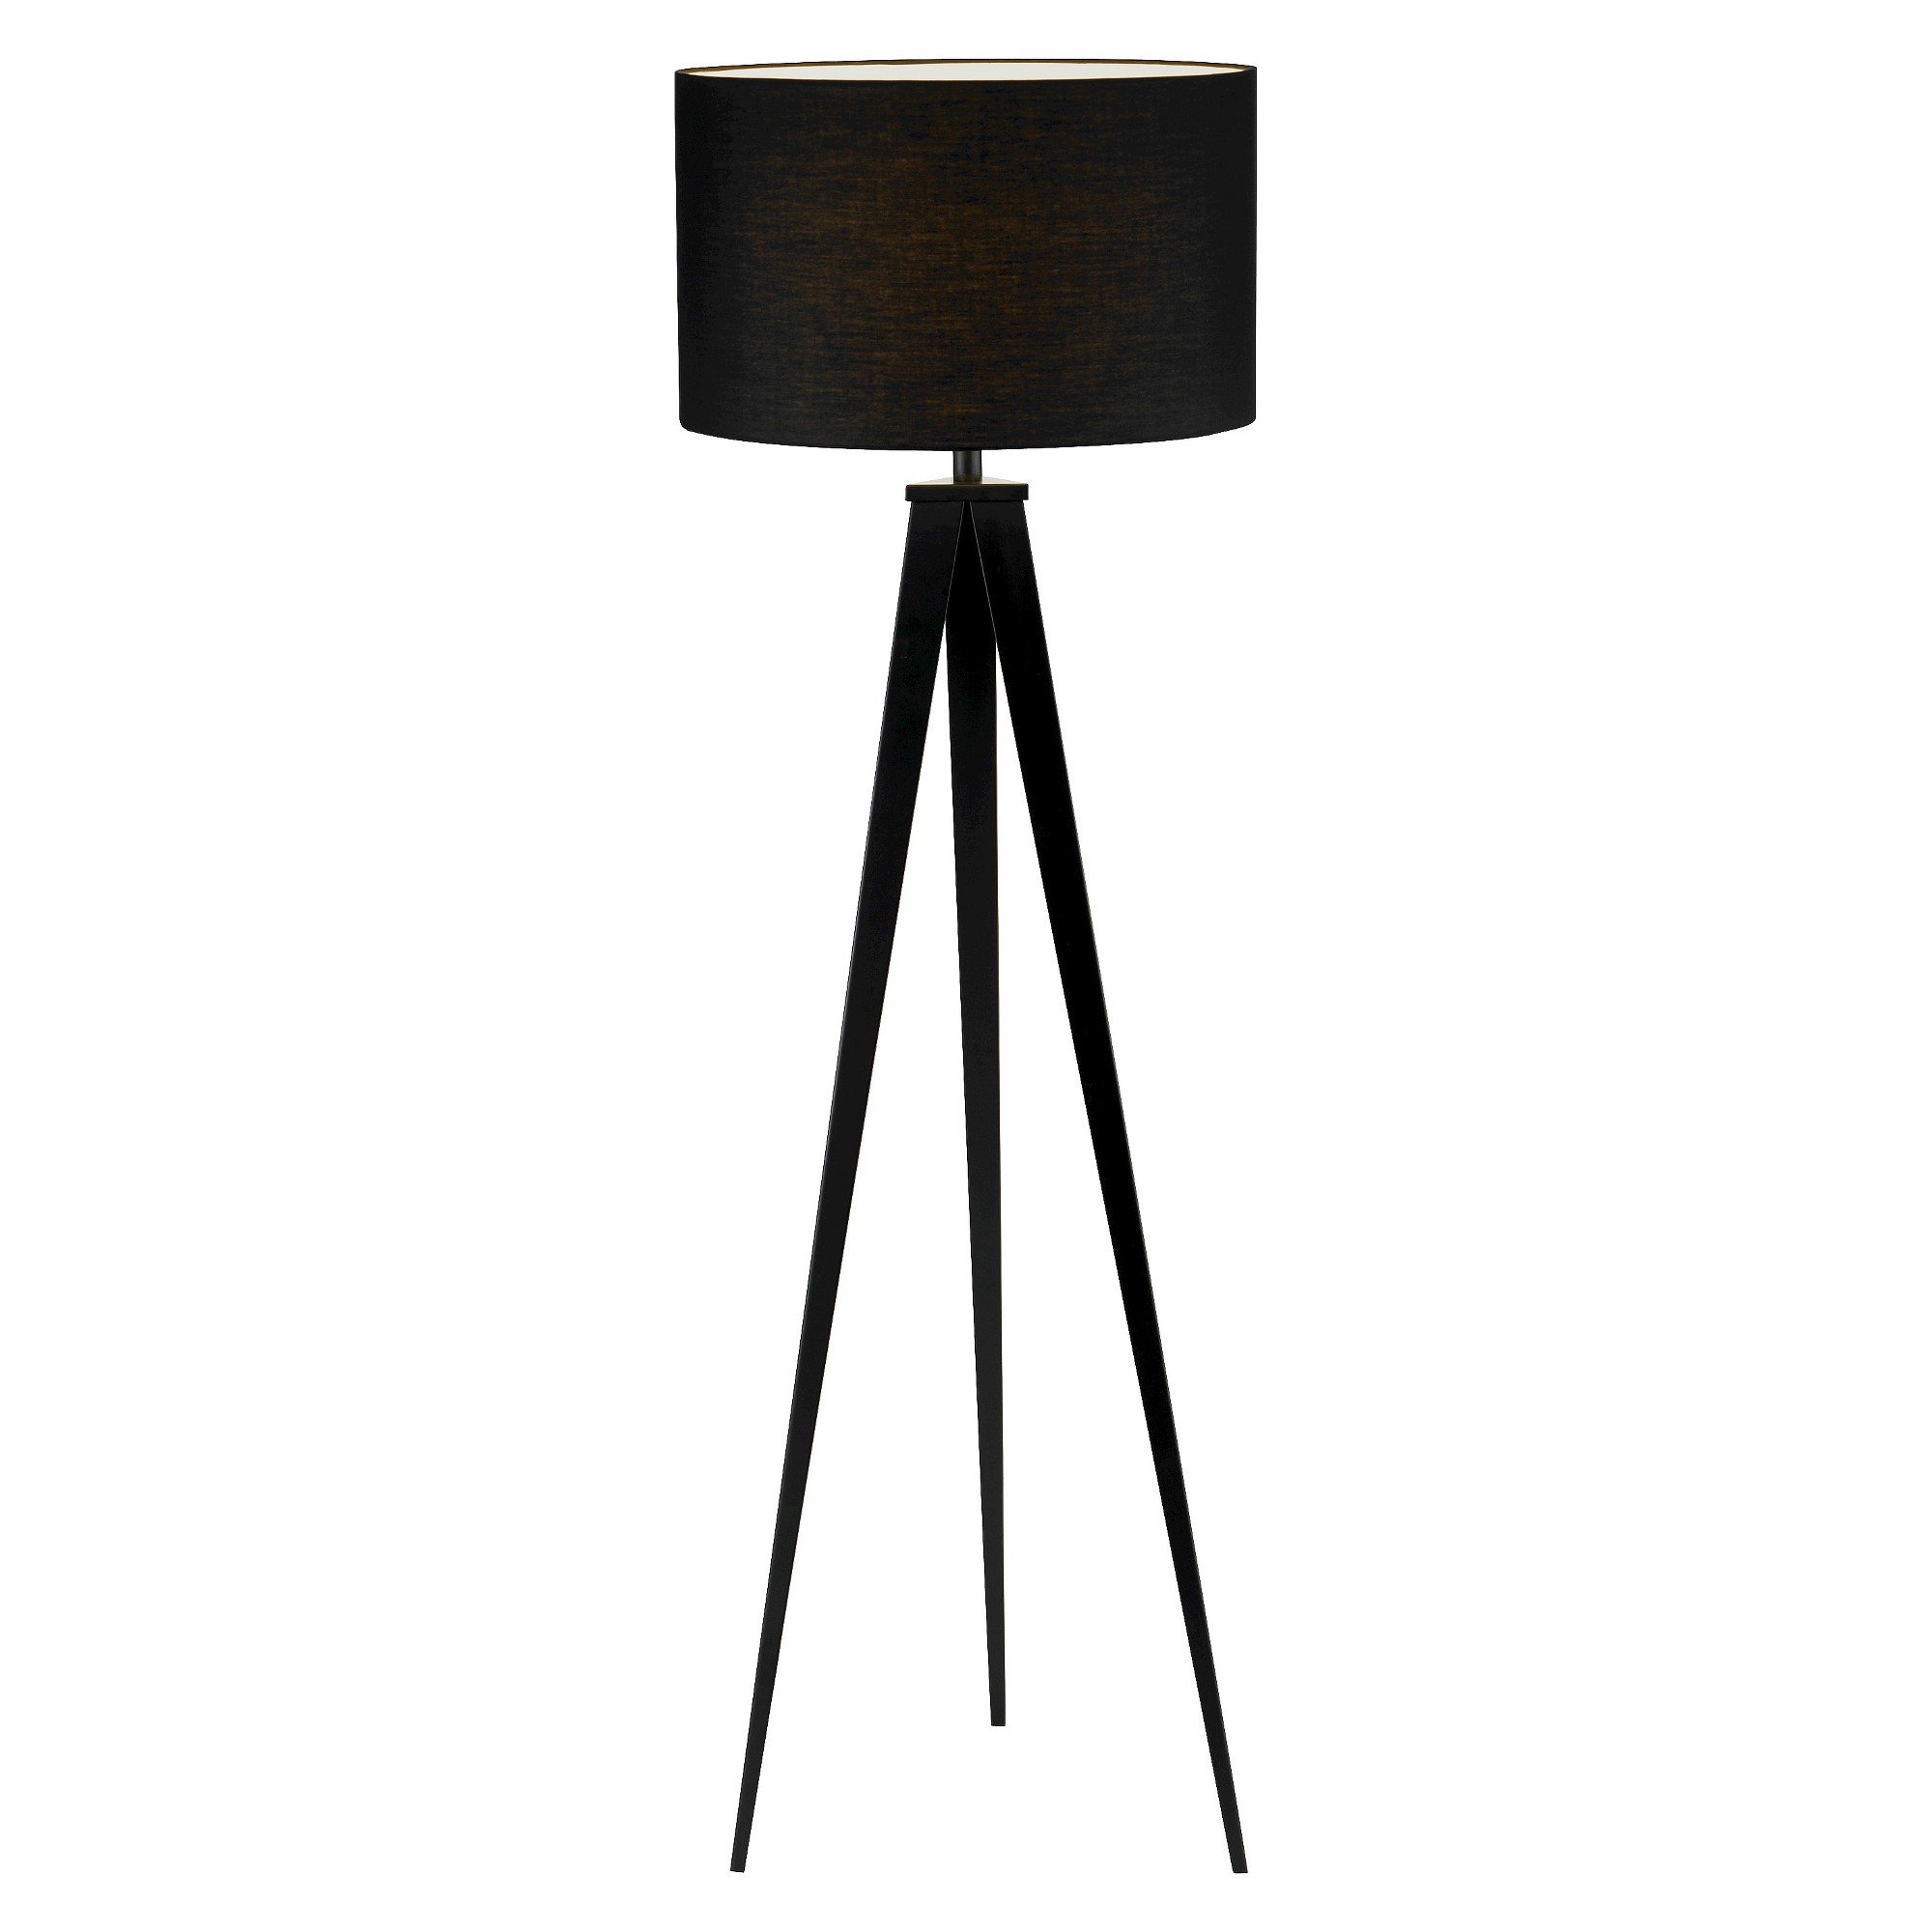 Adesso Director Floor Lamp - Black (Lamp Only)